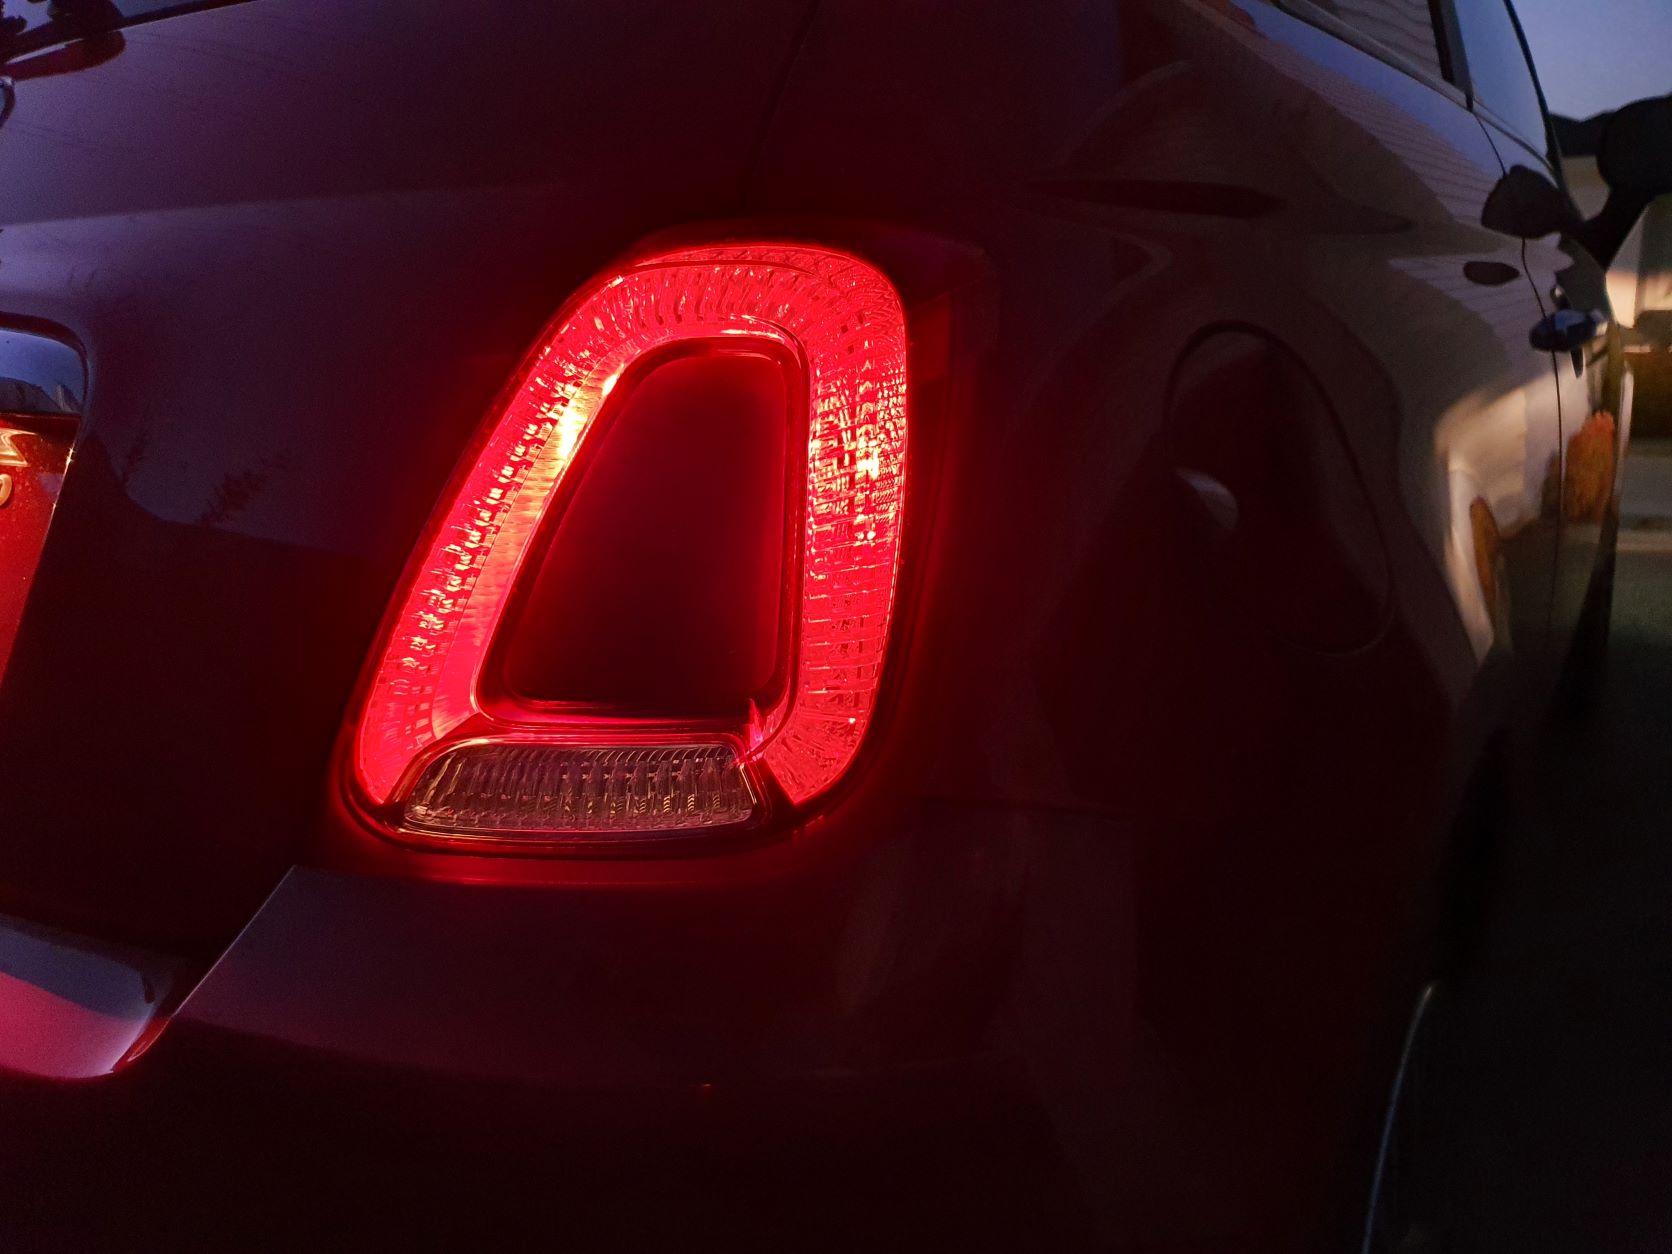 New taillights on the Fiat 500 Dolcevita